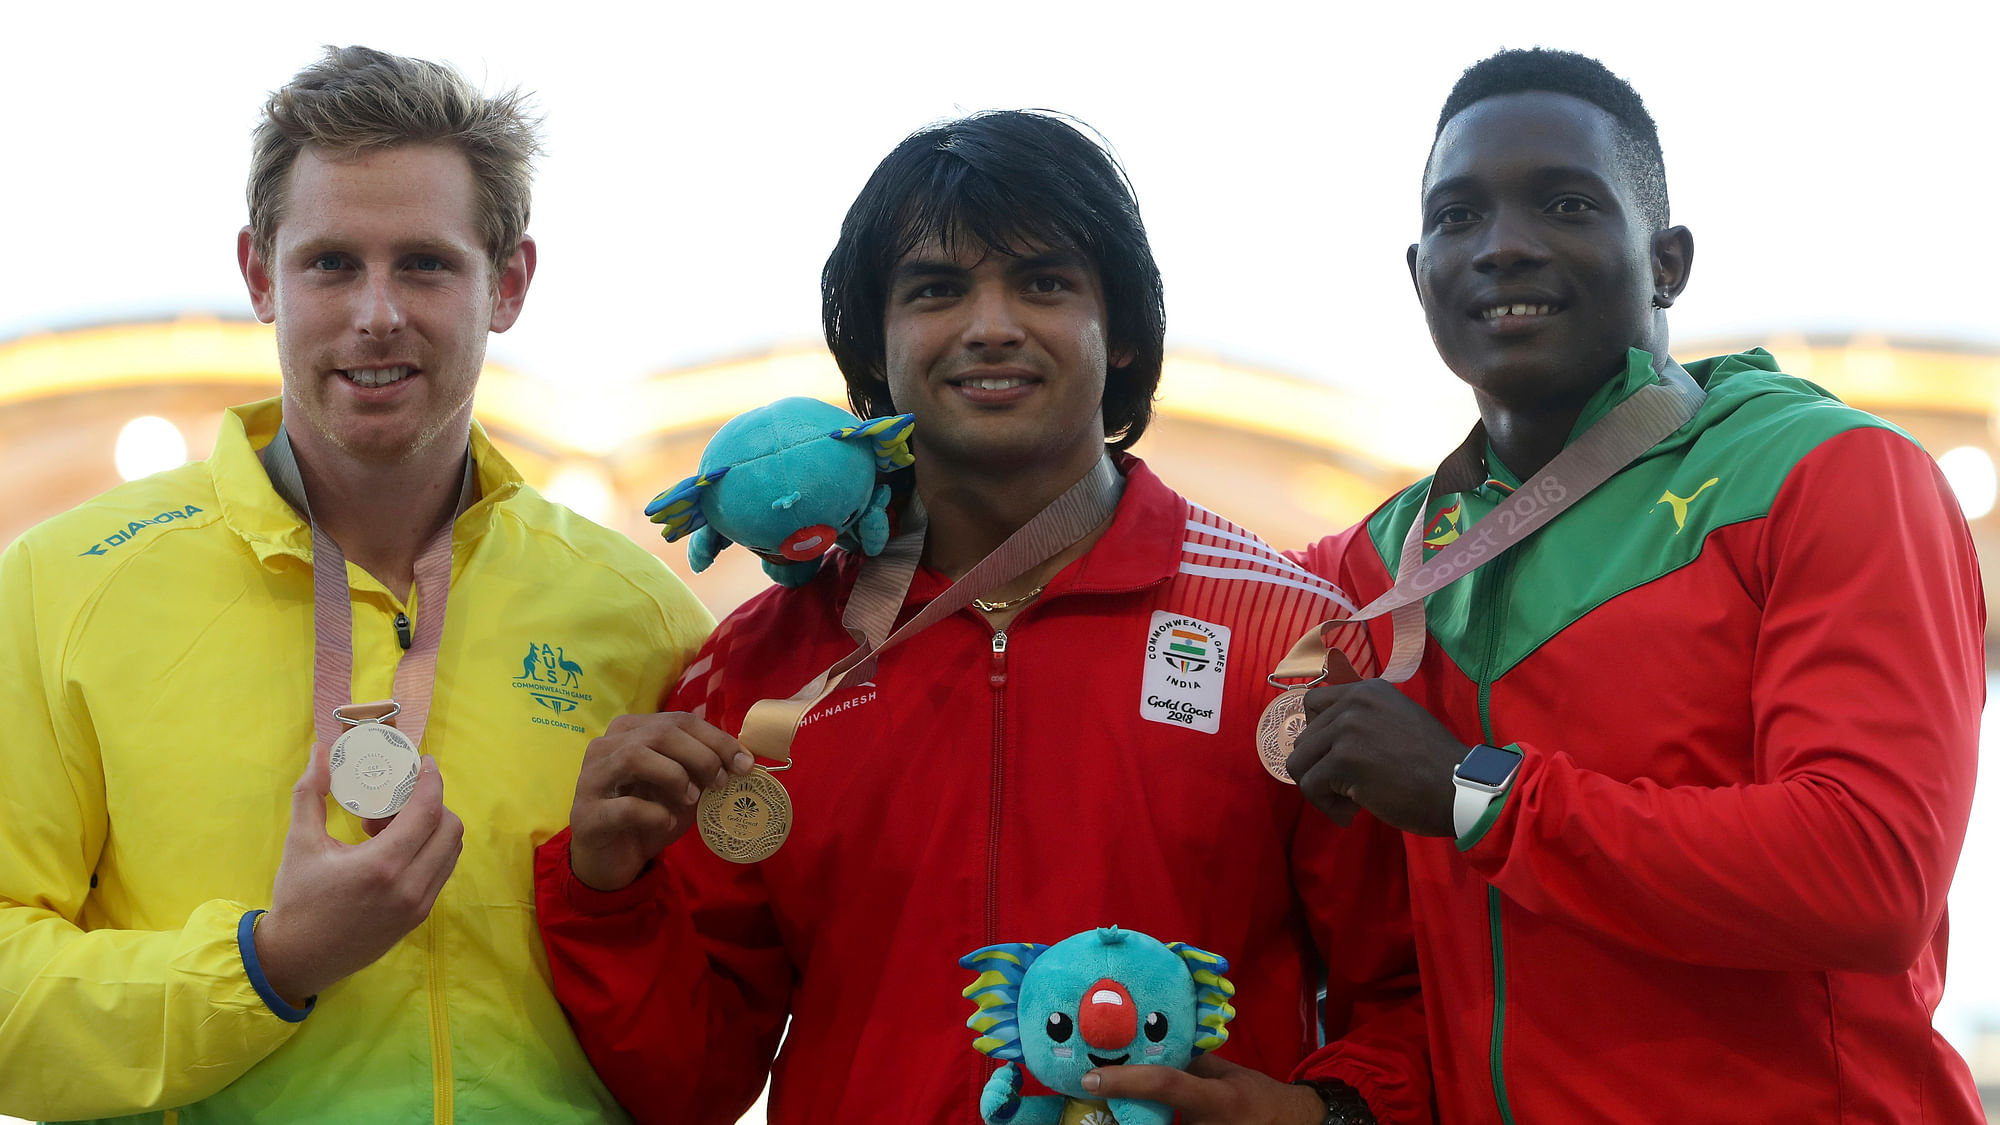 Men’s javelin gold medalist India’s Neeraj Chopra, centre, stands next to silver medalist Australia’s Hamish Peacock, left, and bronze medalist Grenada’s Anderson Peters.